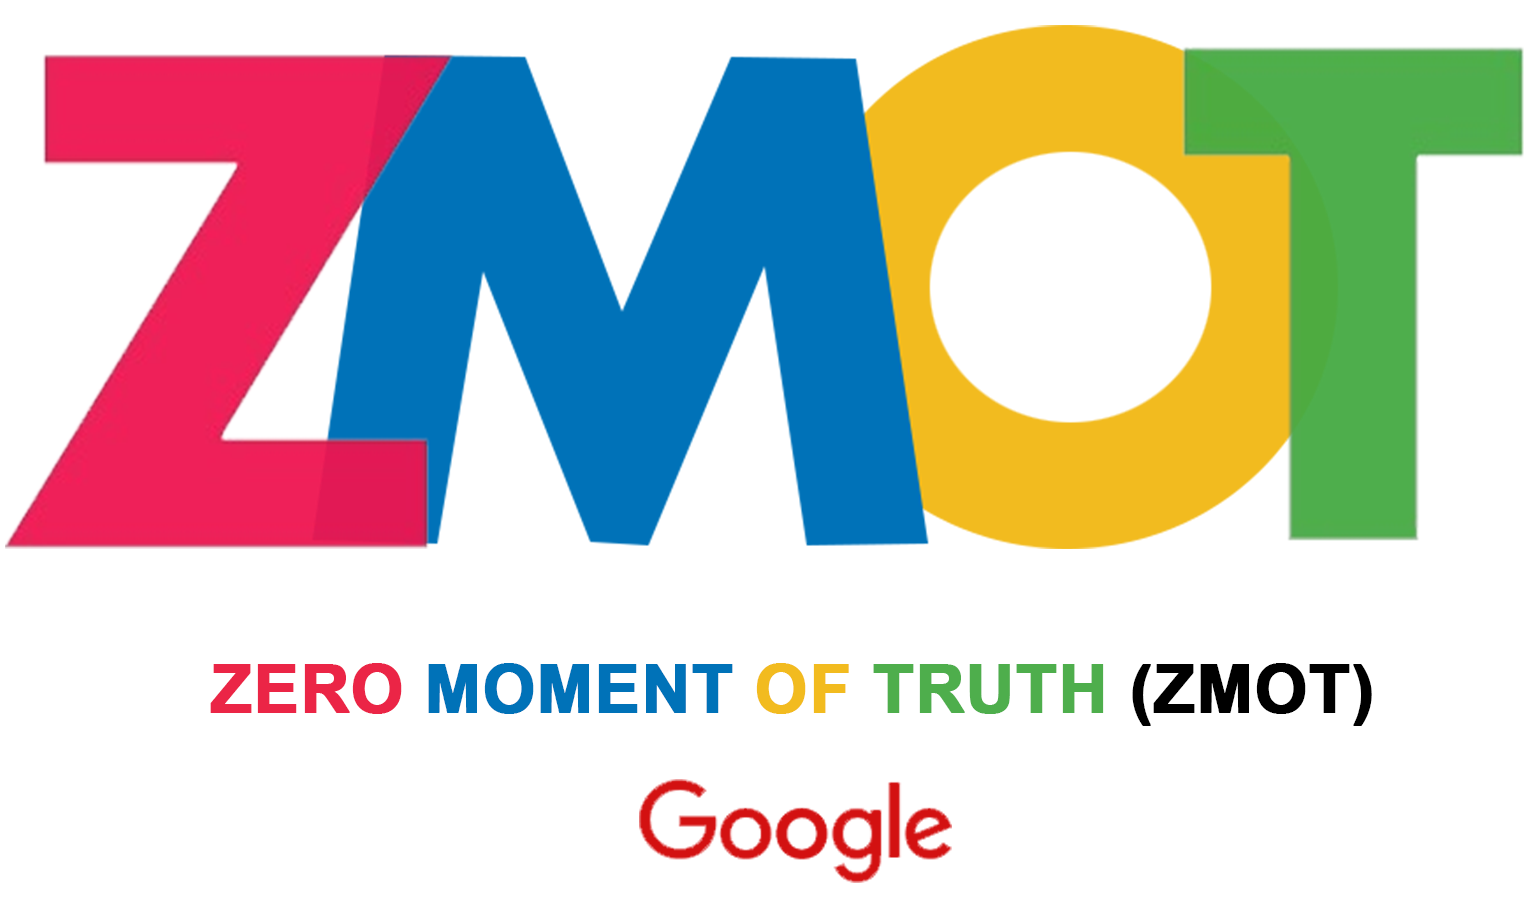 Zero Moment of Truth by Google